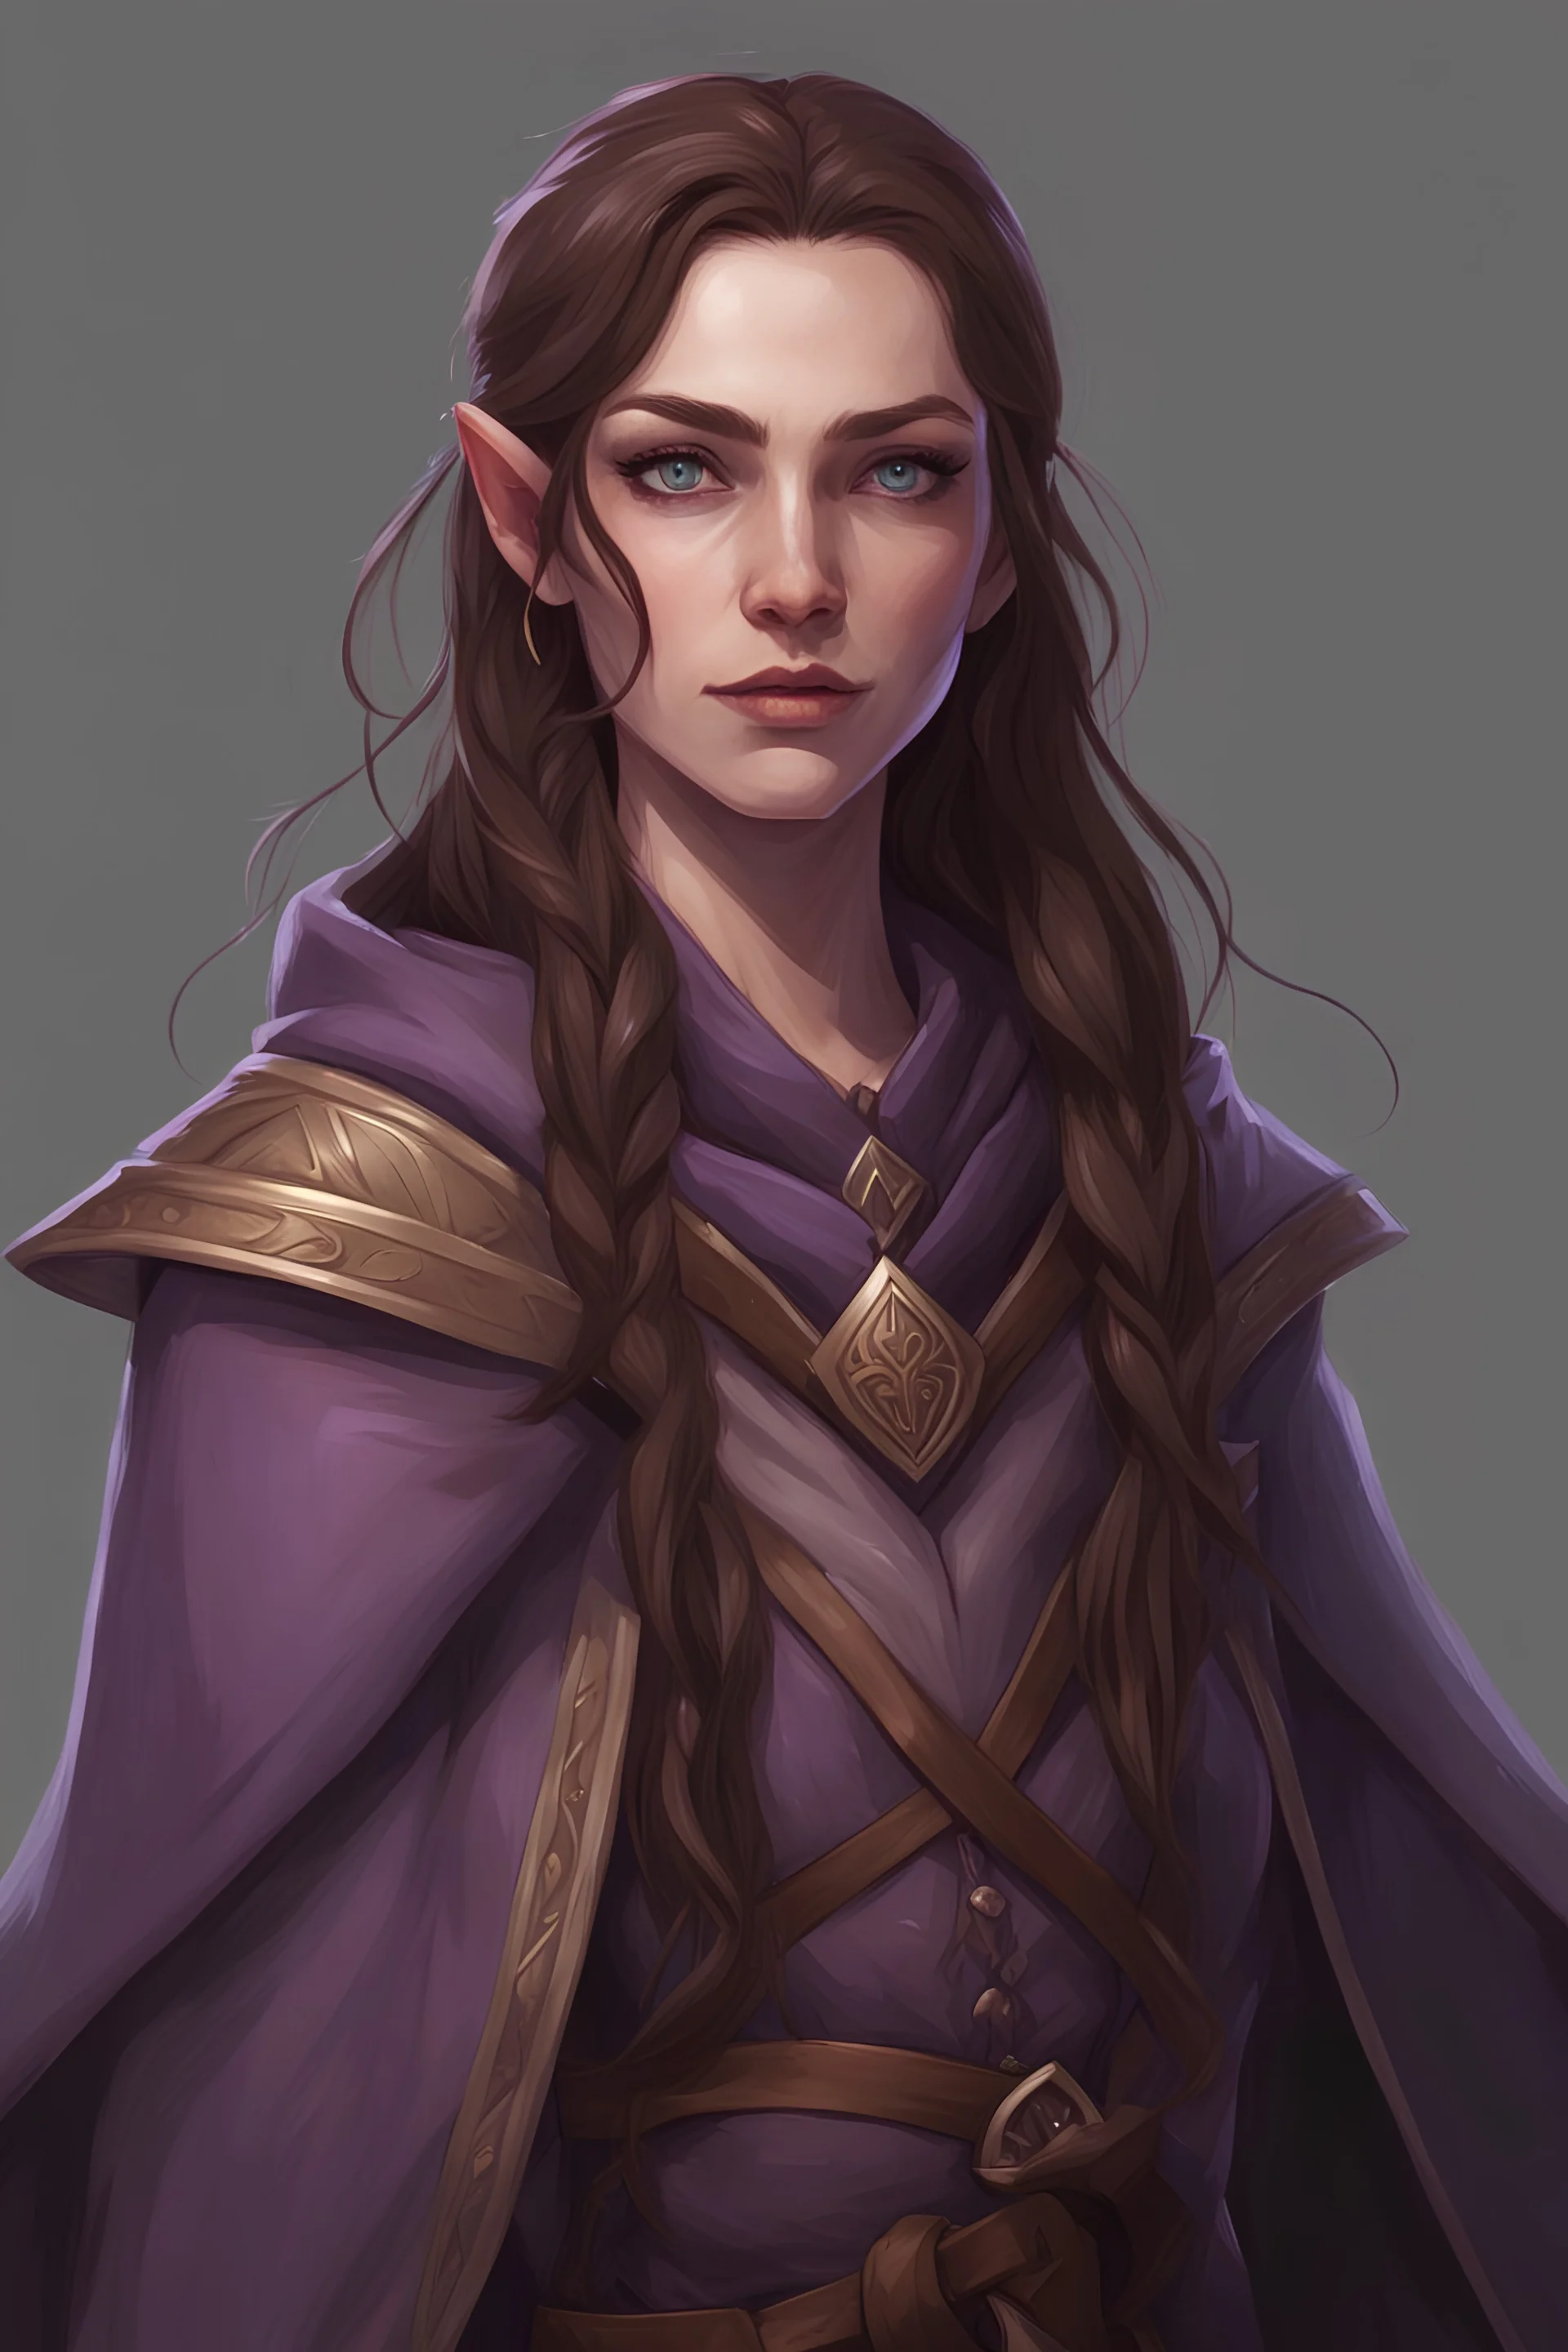 cahotic neutral charismatic Wood Elf Bard Female with pale skin and very sharp features, long brown hair, wearing a purple vest and brown adventurer's cloak with a smug face. Holding lute.